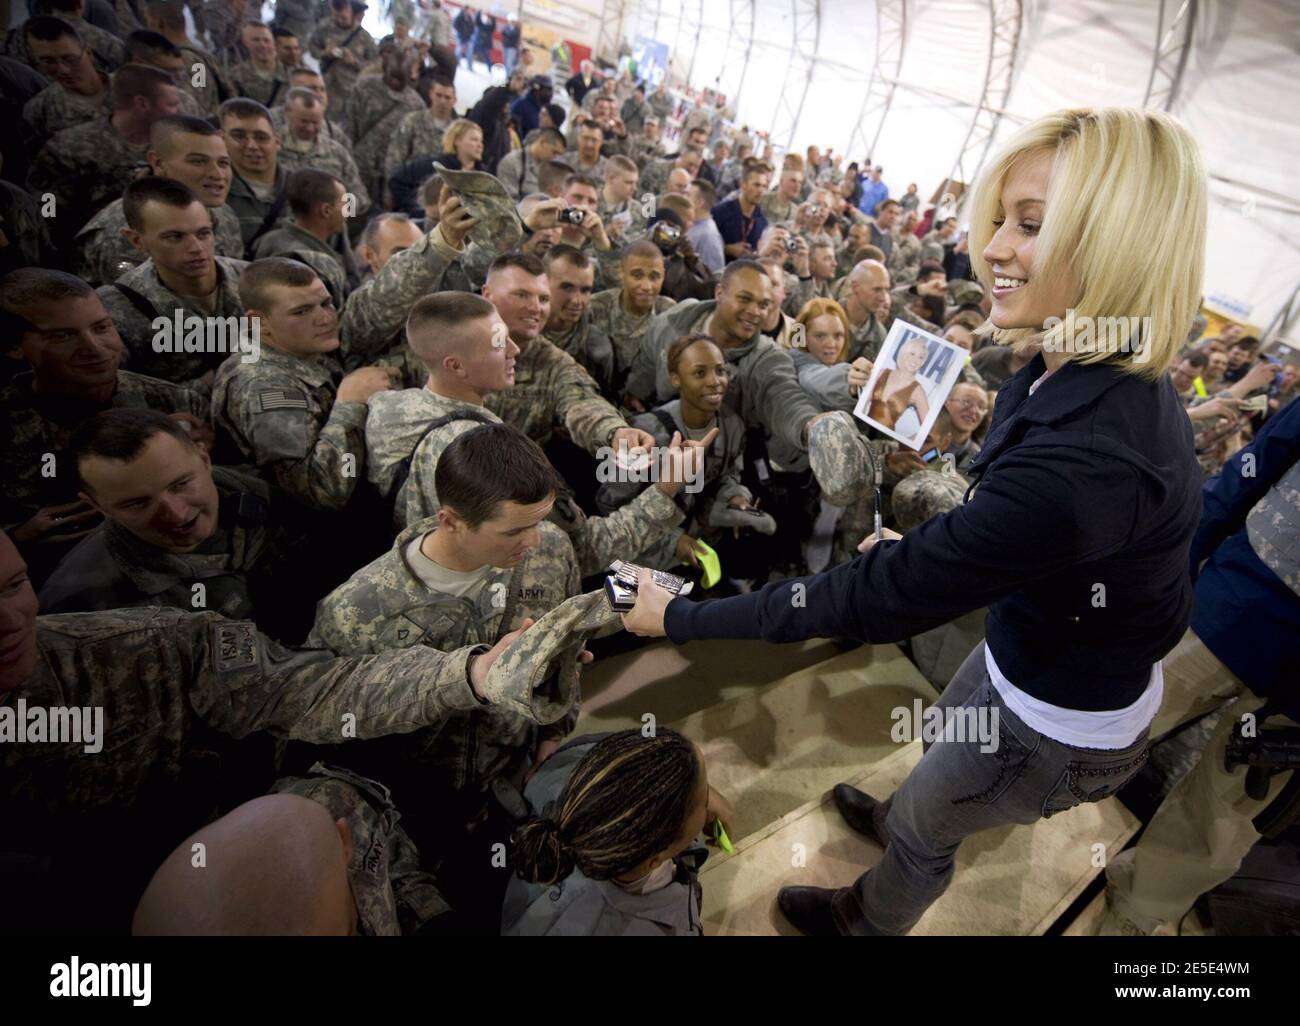 American Idol contestant Kellie Pickler signs autographs for soldiers after performing at Bagram Air Base in Kandahar, Afghanistan on December 17, 2008, during the 2008 USO Holiday Tour. Photo by Chad J. McNeeley/DOD/ABACAPRESS.COM Stock Photo